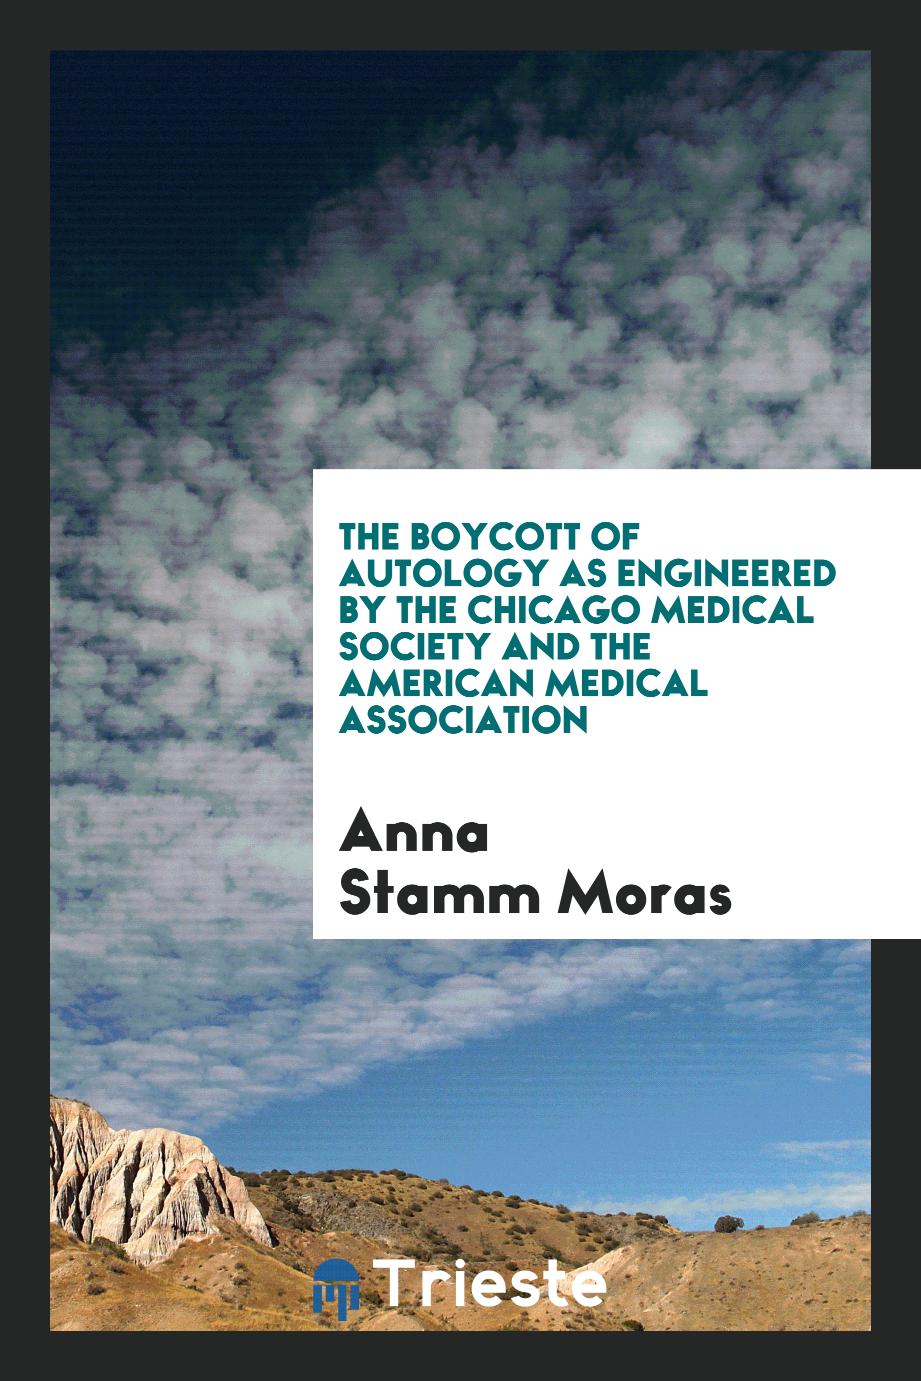 The boycott of autology as engineered by the Chicago medical society and the American medical association